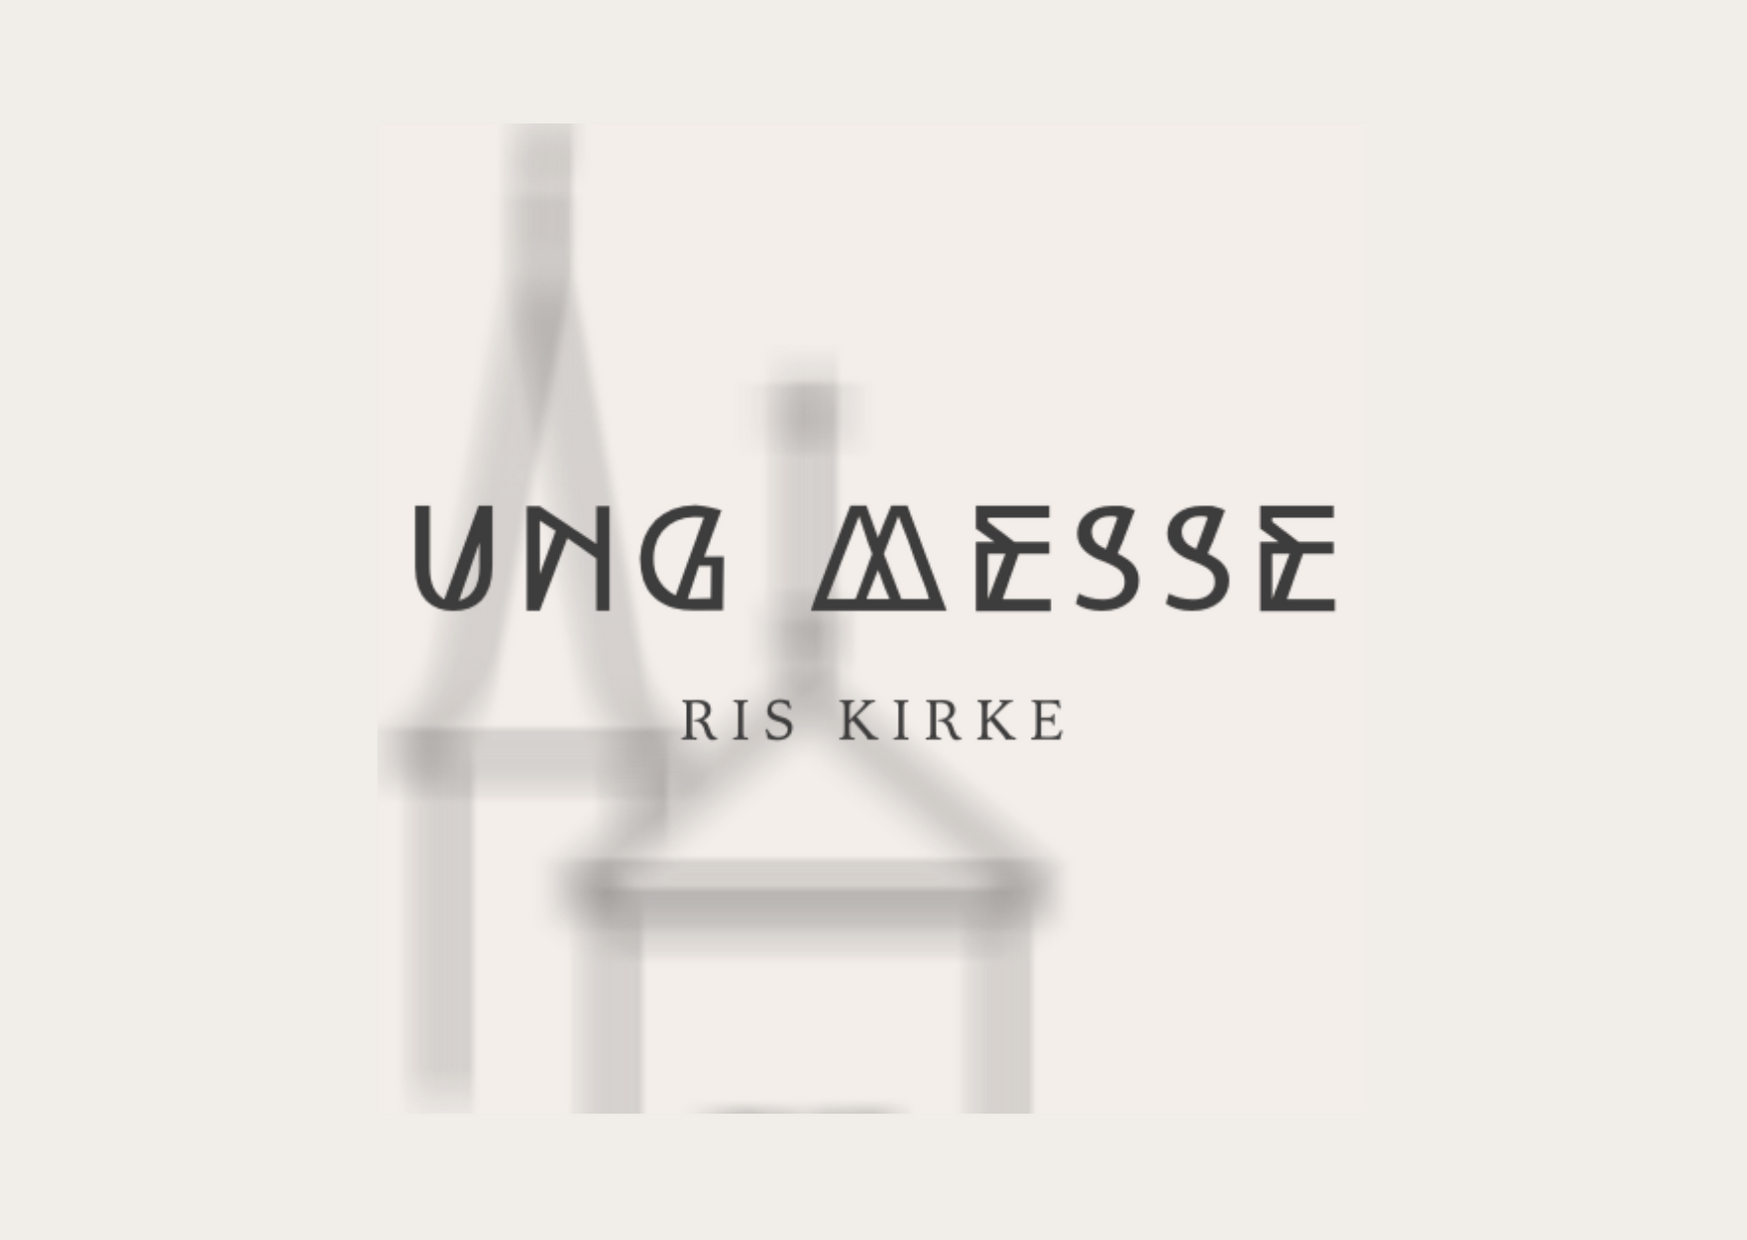 Ung messe